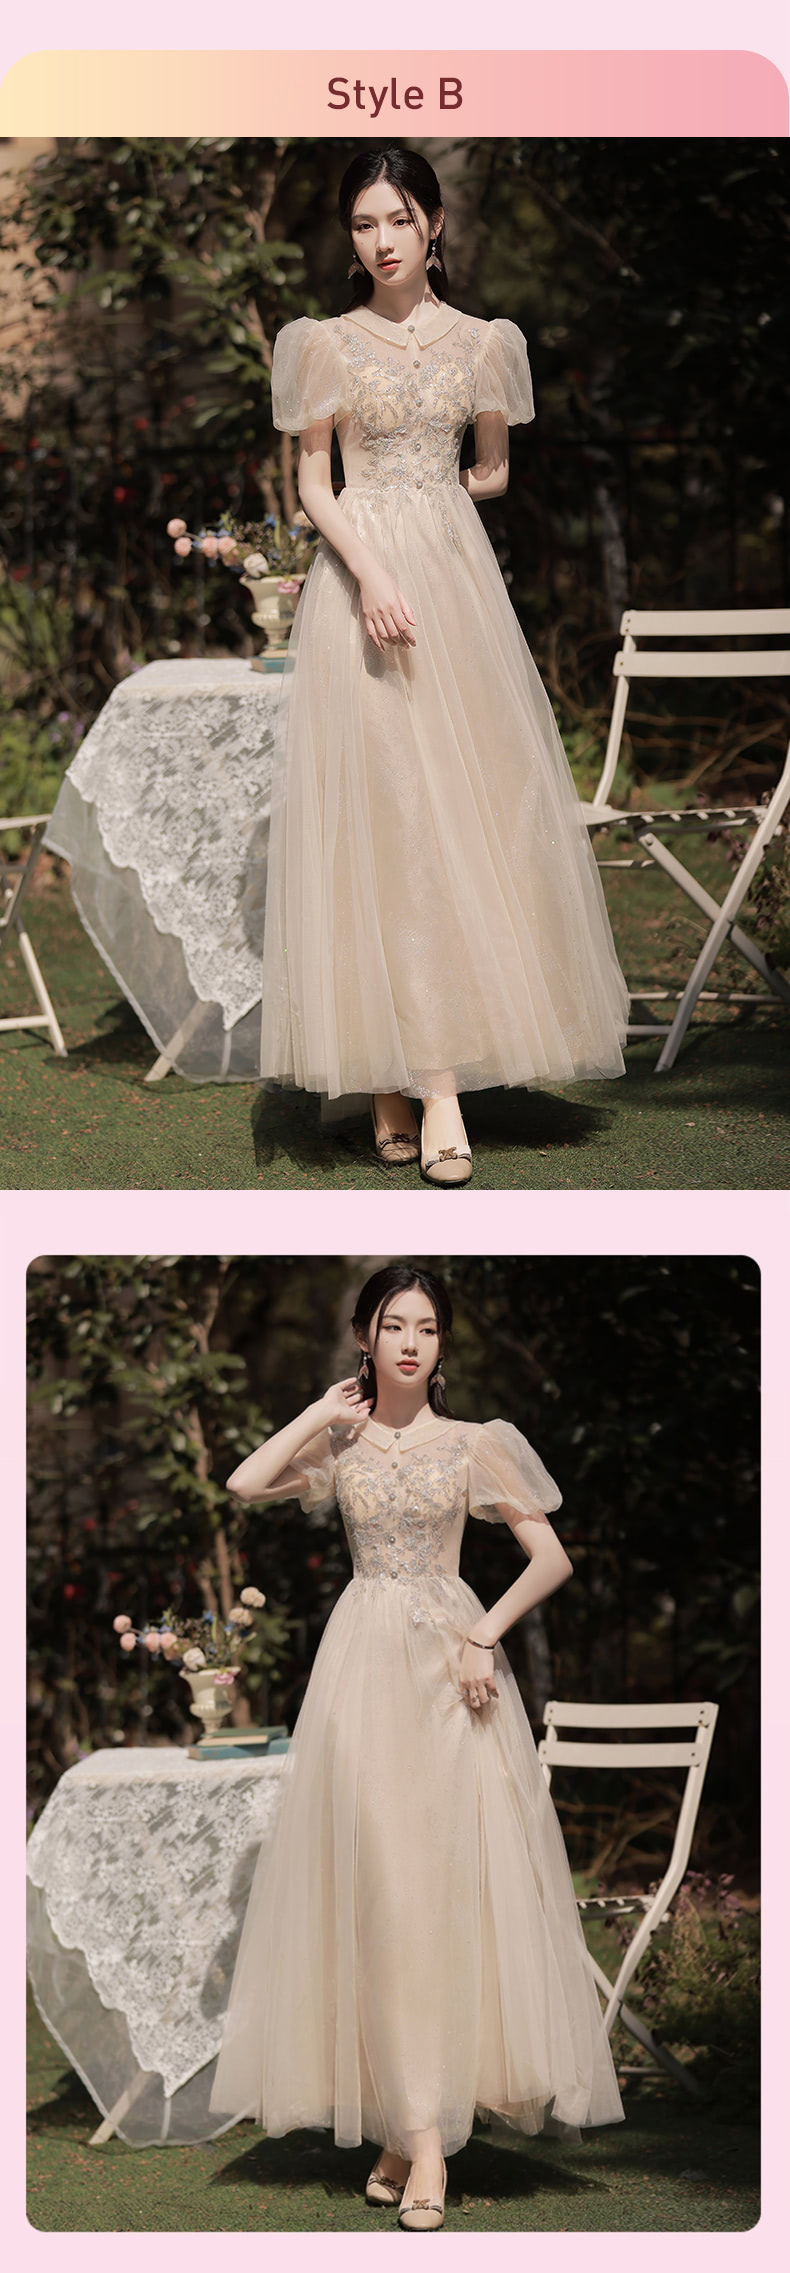 Formal-Apricot-Bridesmaid-Dress-Evening-Gown-for-Wedding-Party19.jpg